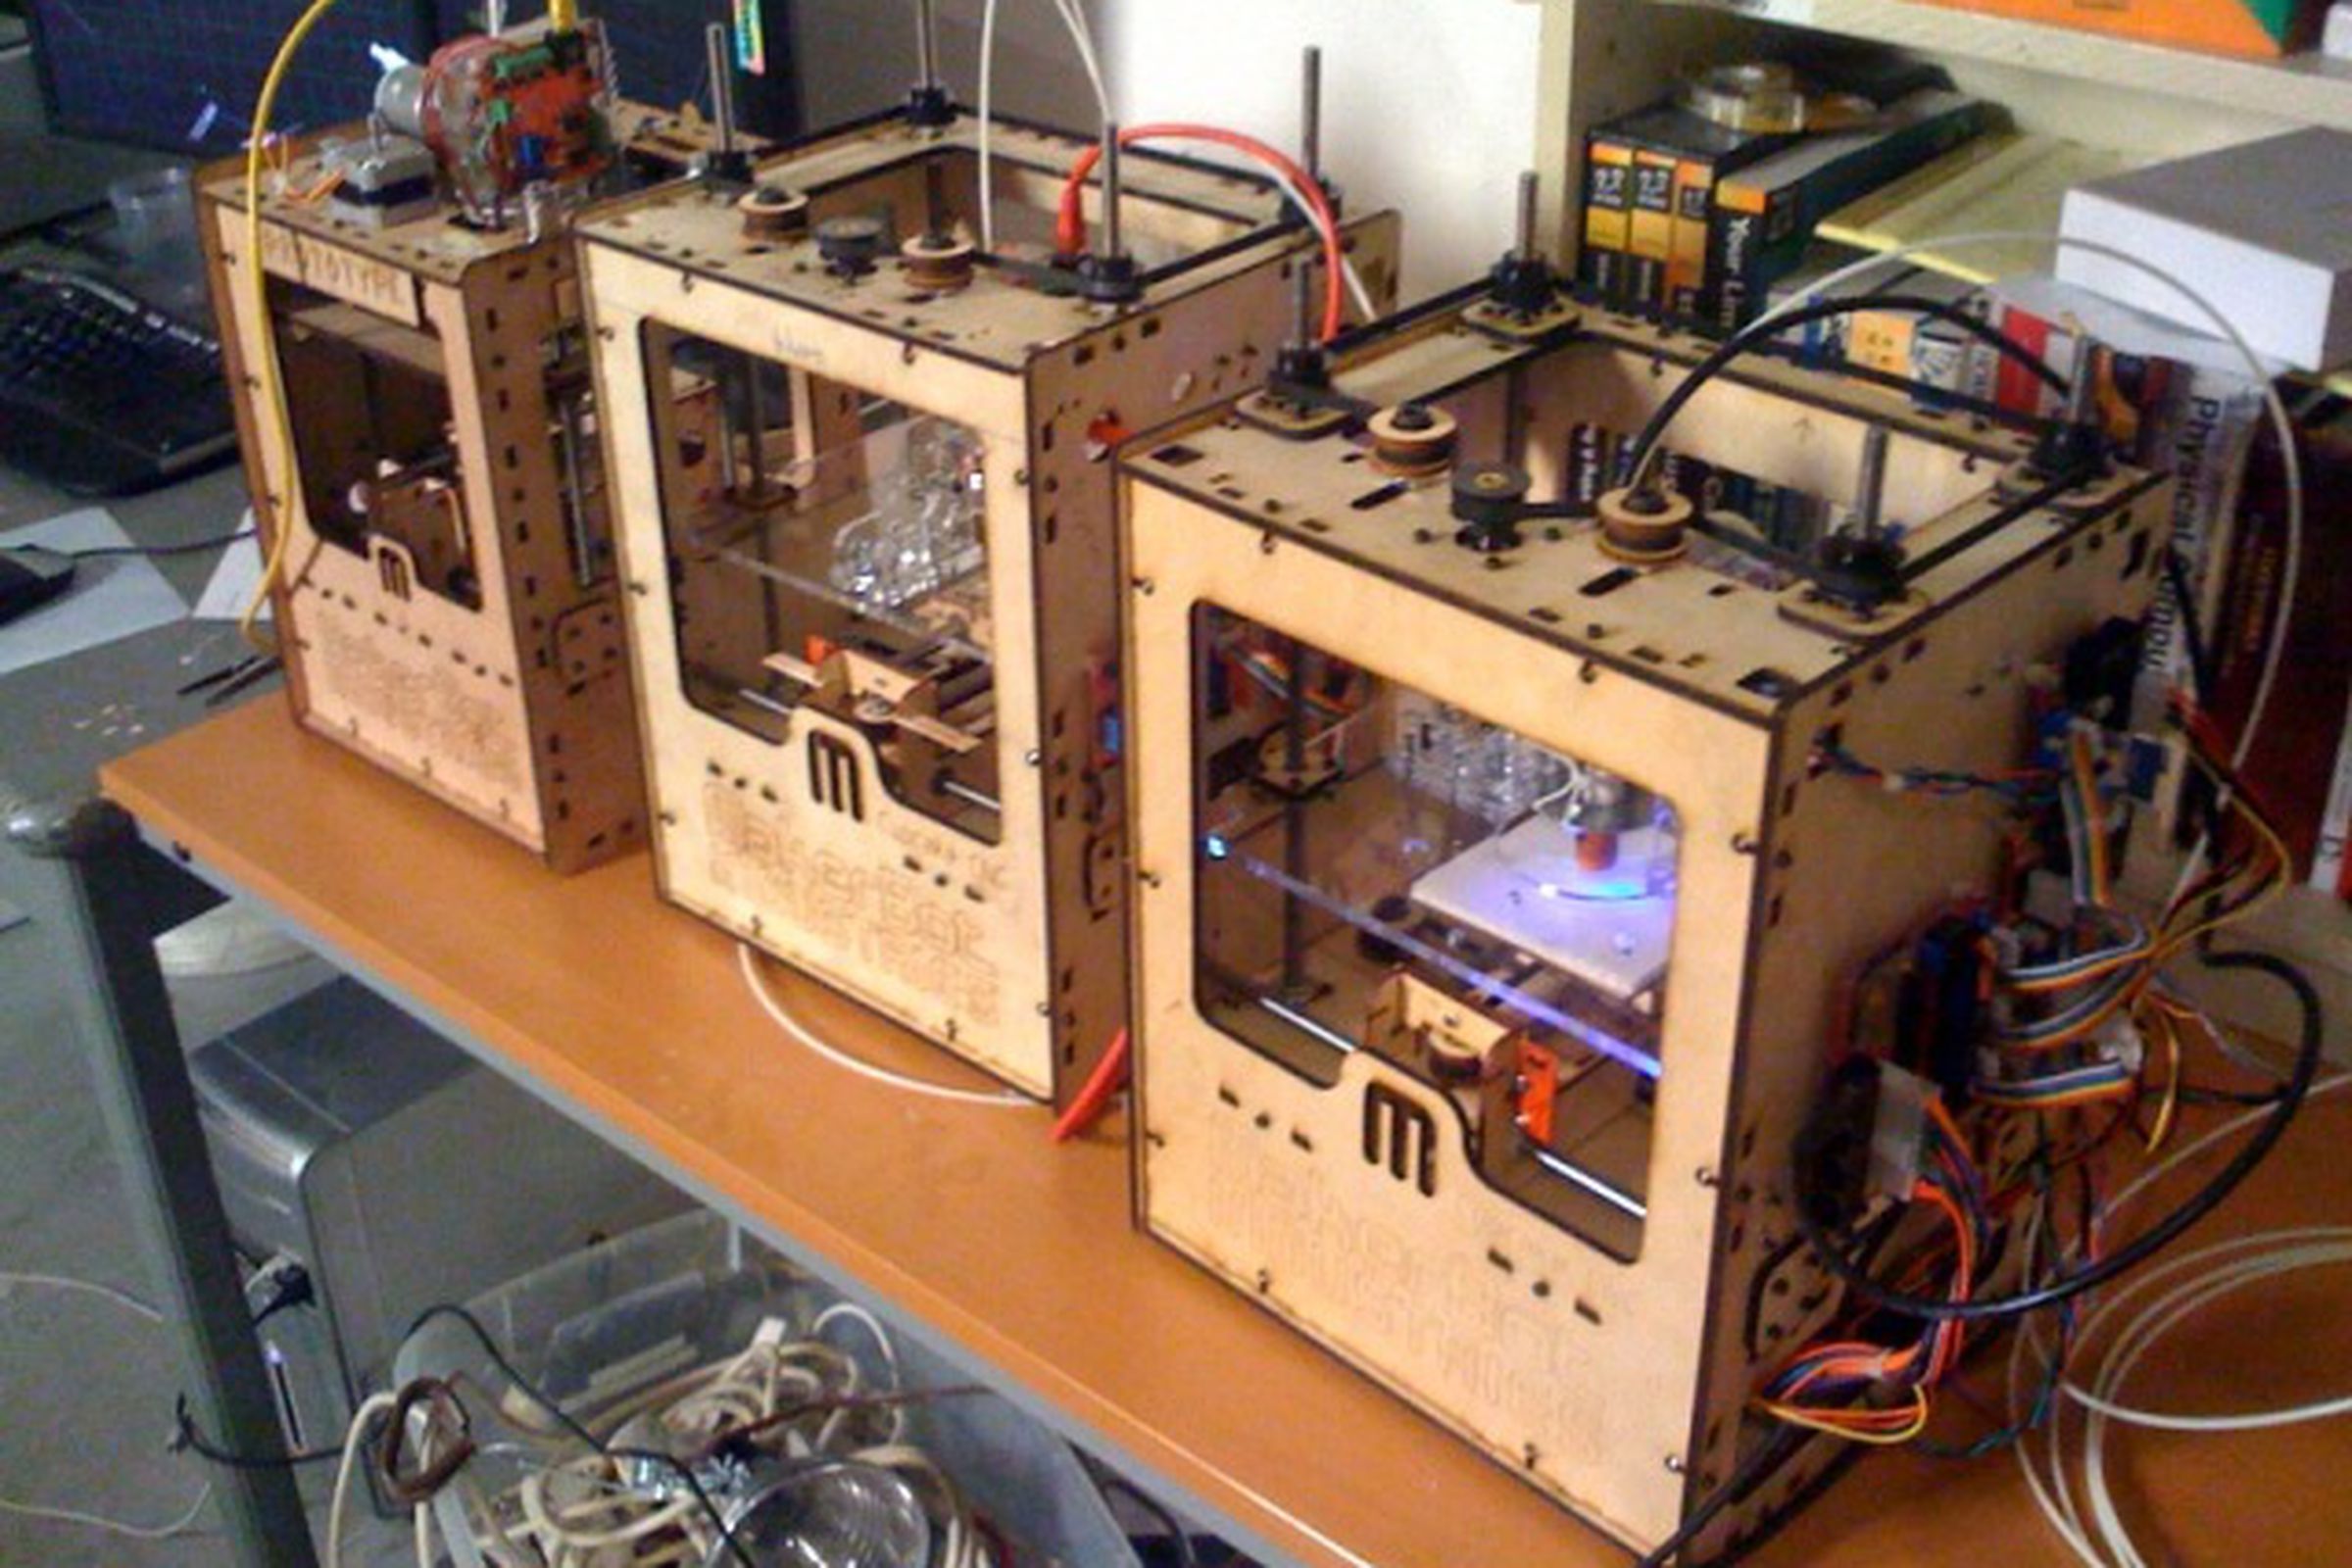 MakerBot (Wired)